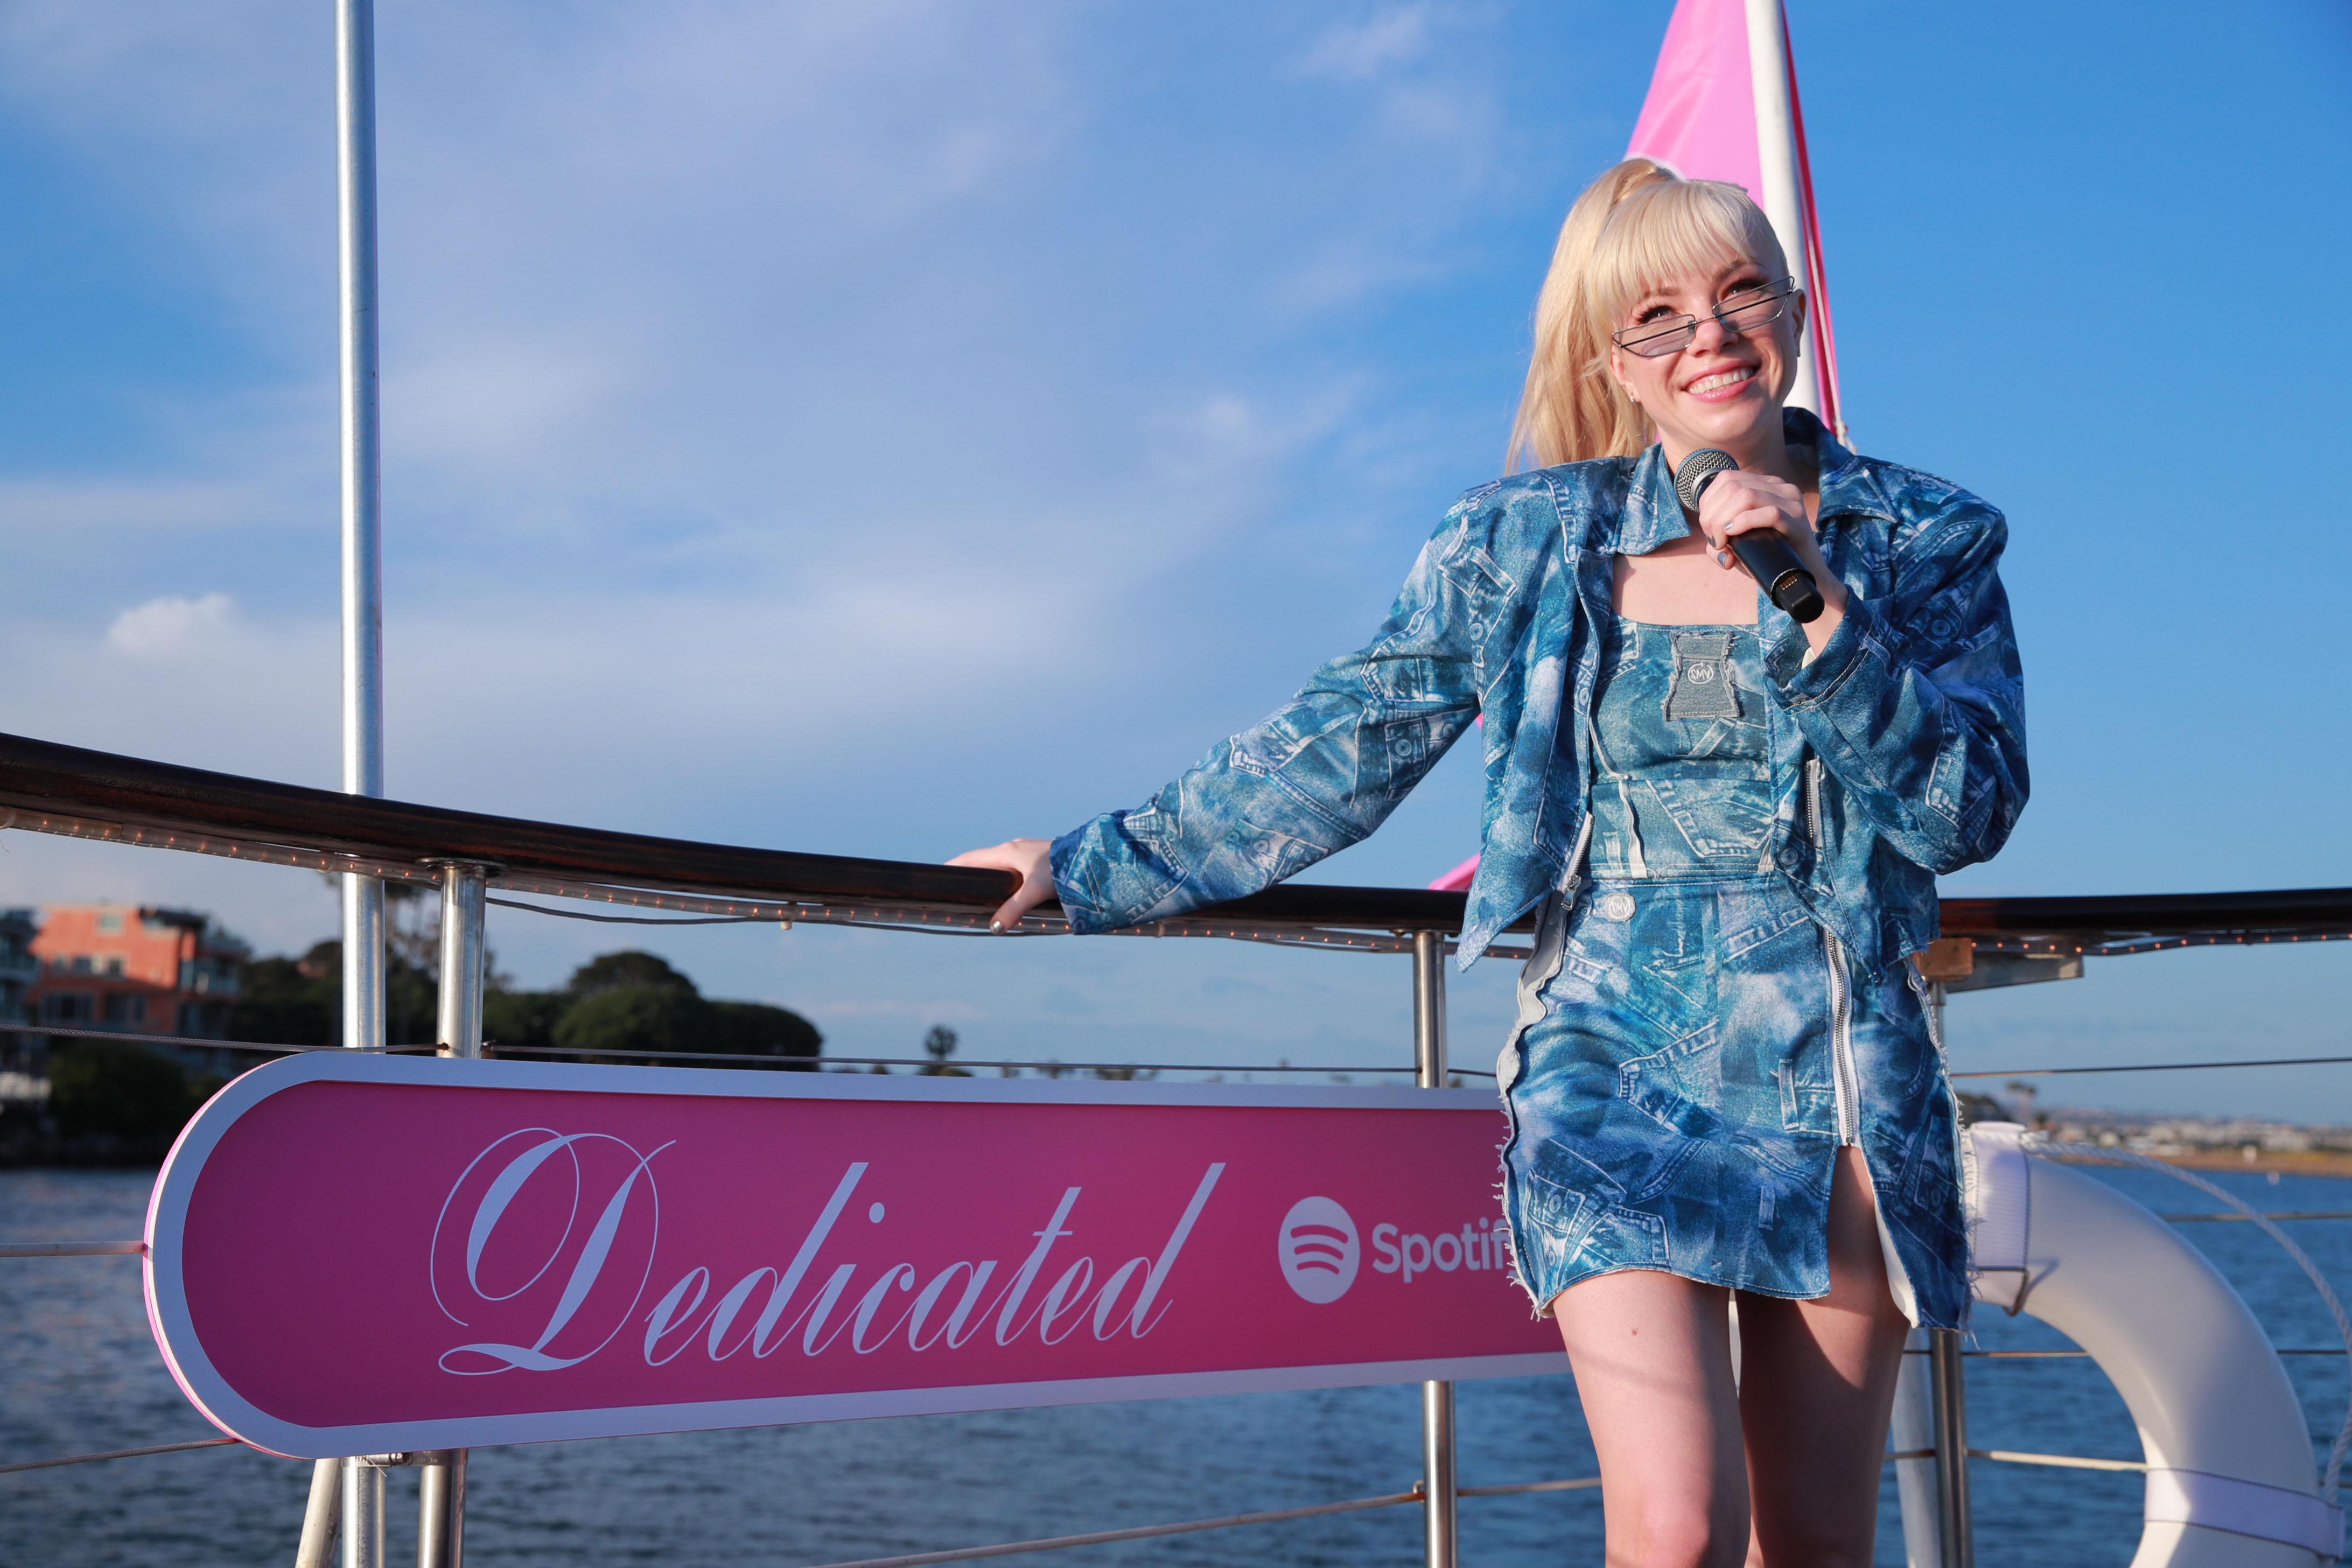 If you know, you know': How Carly Rae Jepsen became pop music's most